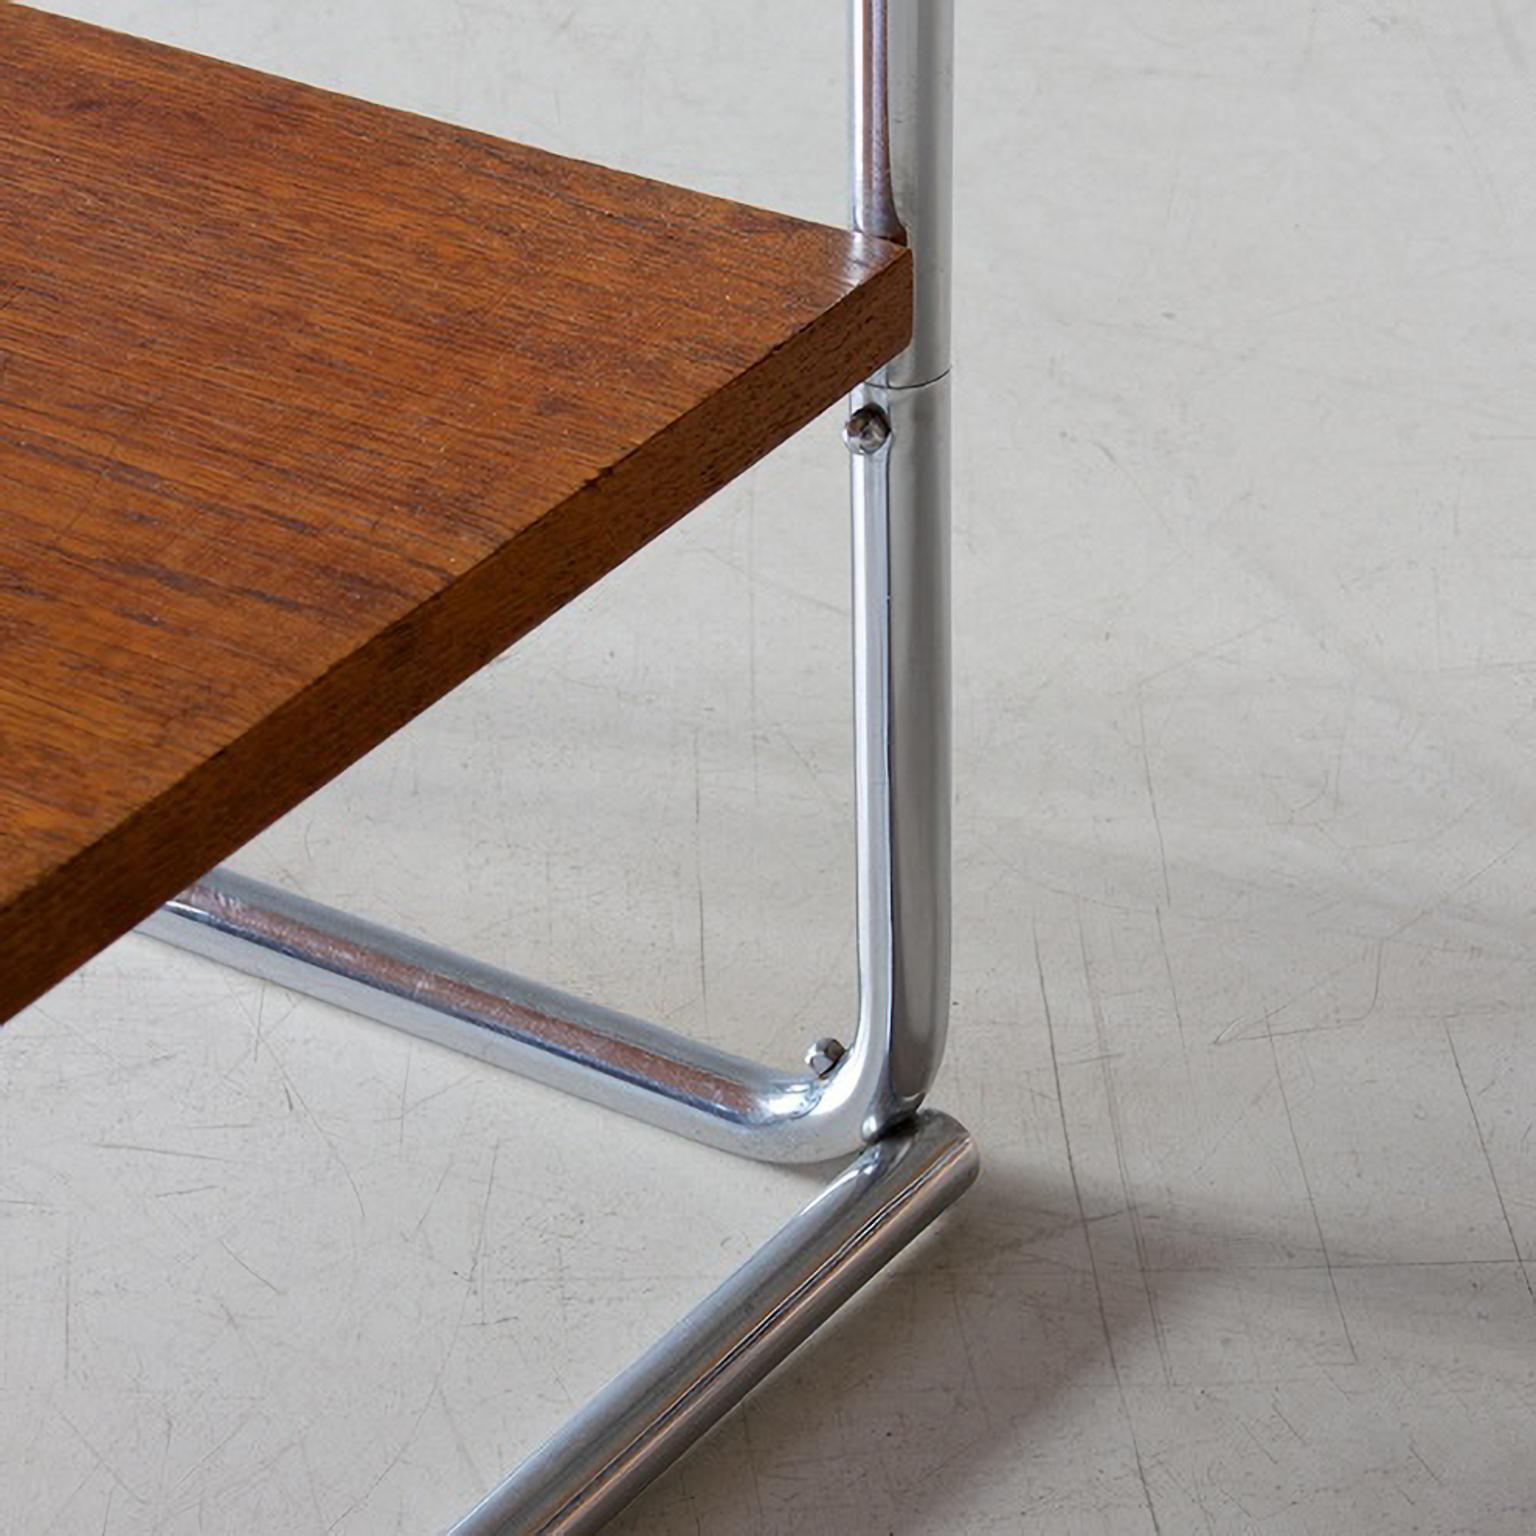 Bauhaus Tubular Steel End Table With Drawer, Chromed Metal, Veneered Wood, 1930 In Good Condition For Sale In Berlin, DE